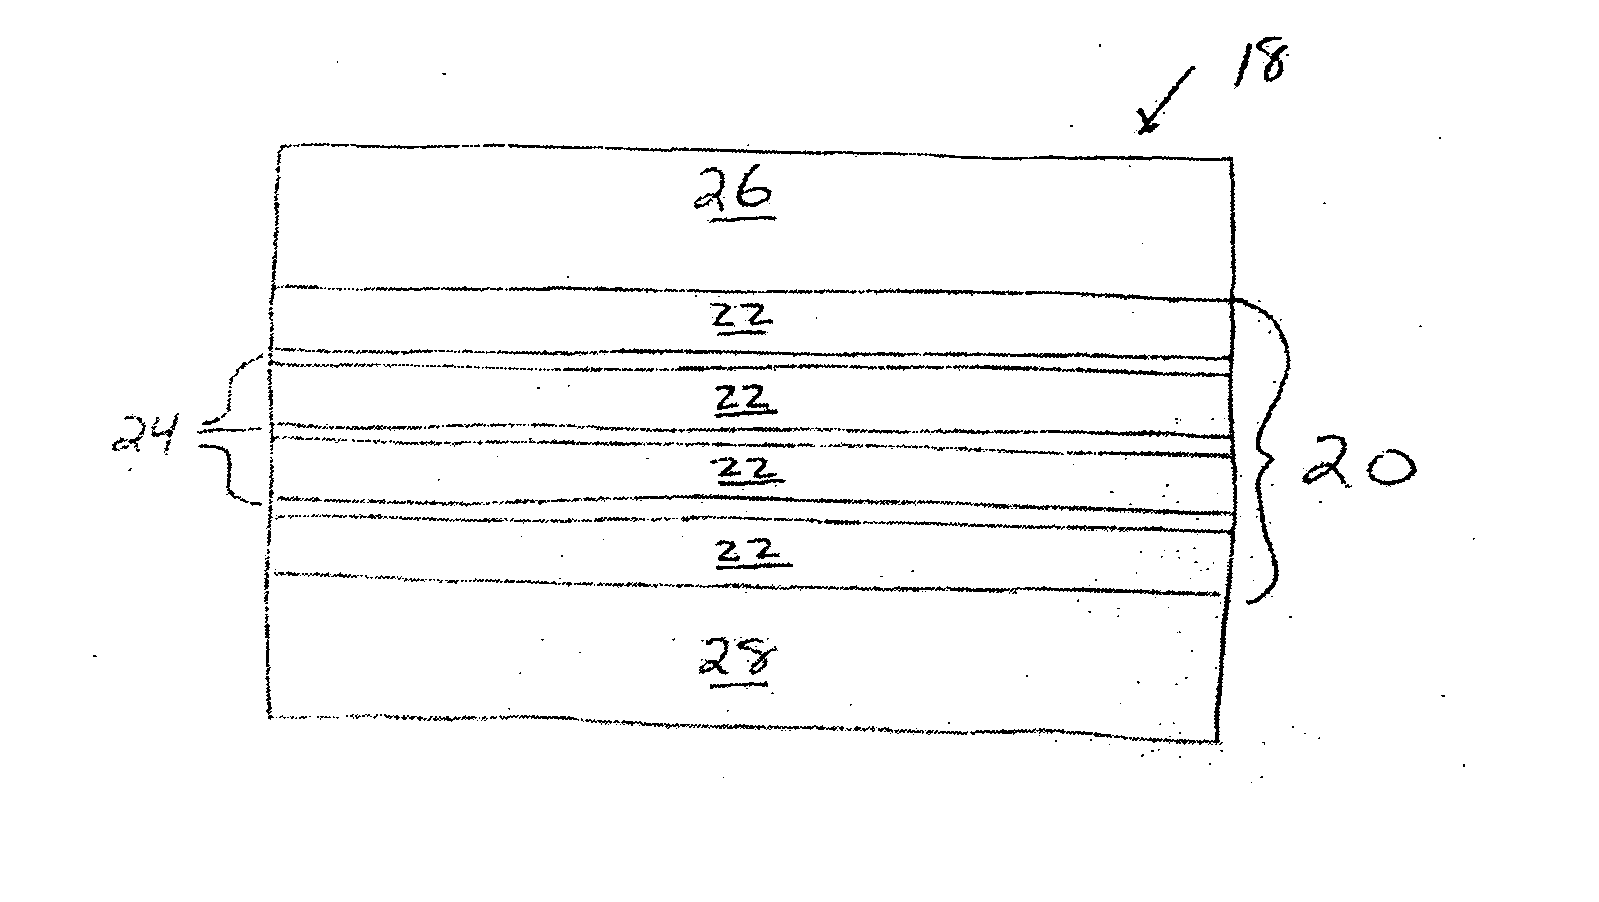 Memory device with discrete layers of phase change memory material